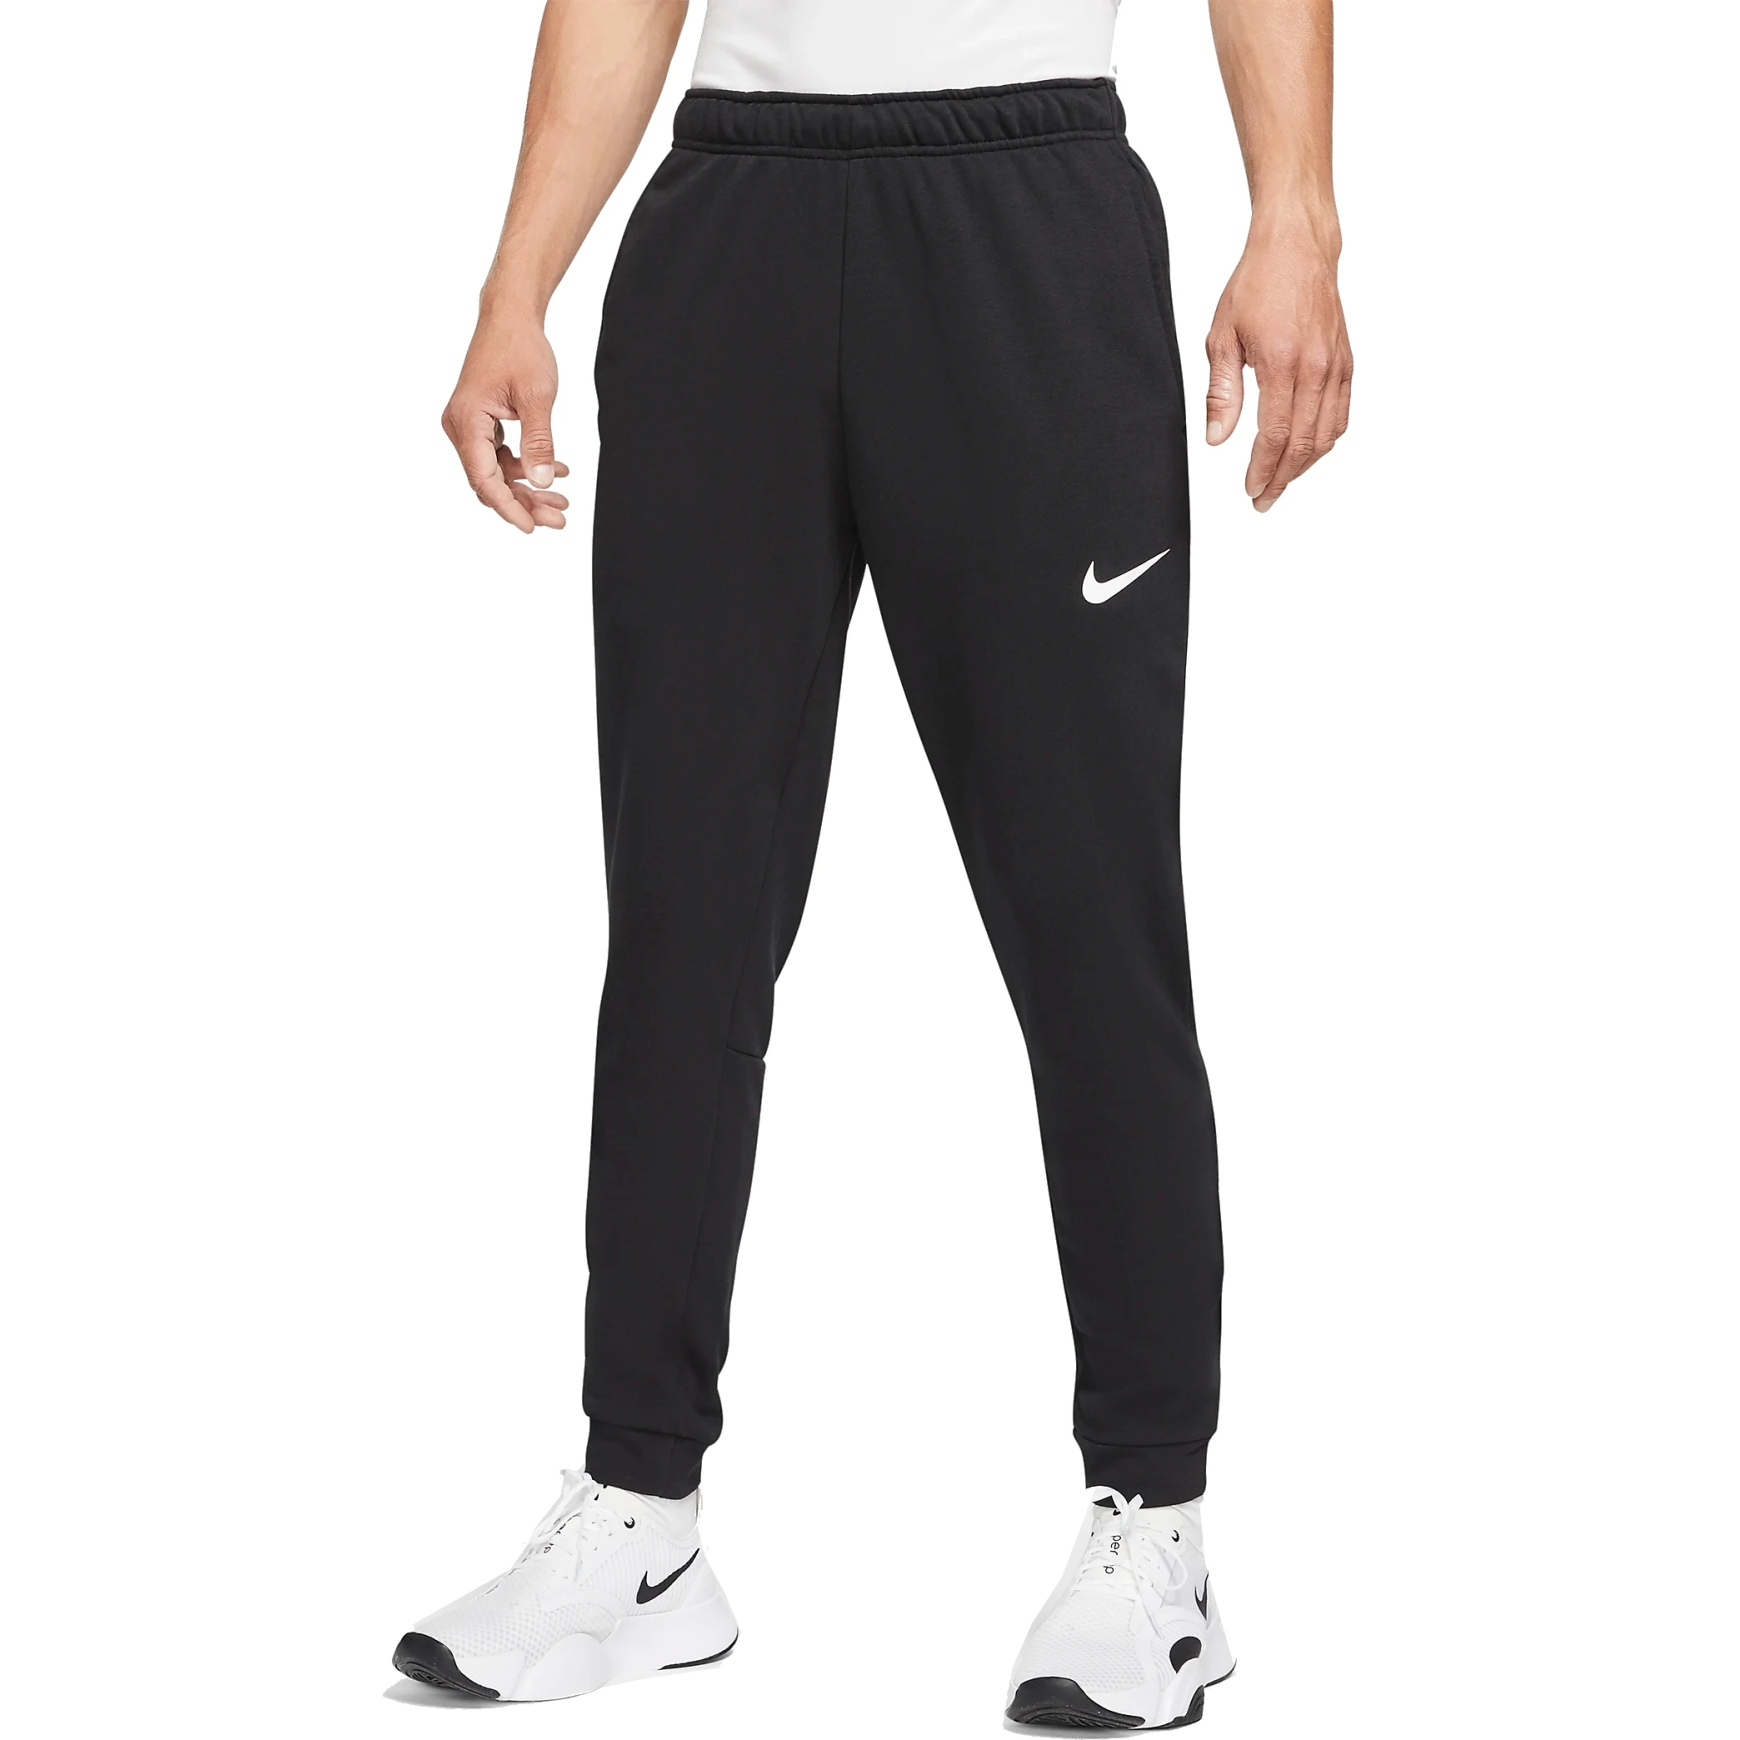 Women's Nike Tapered Activewear